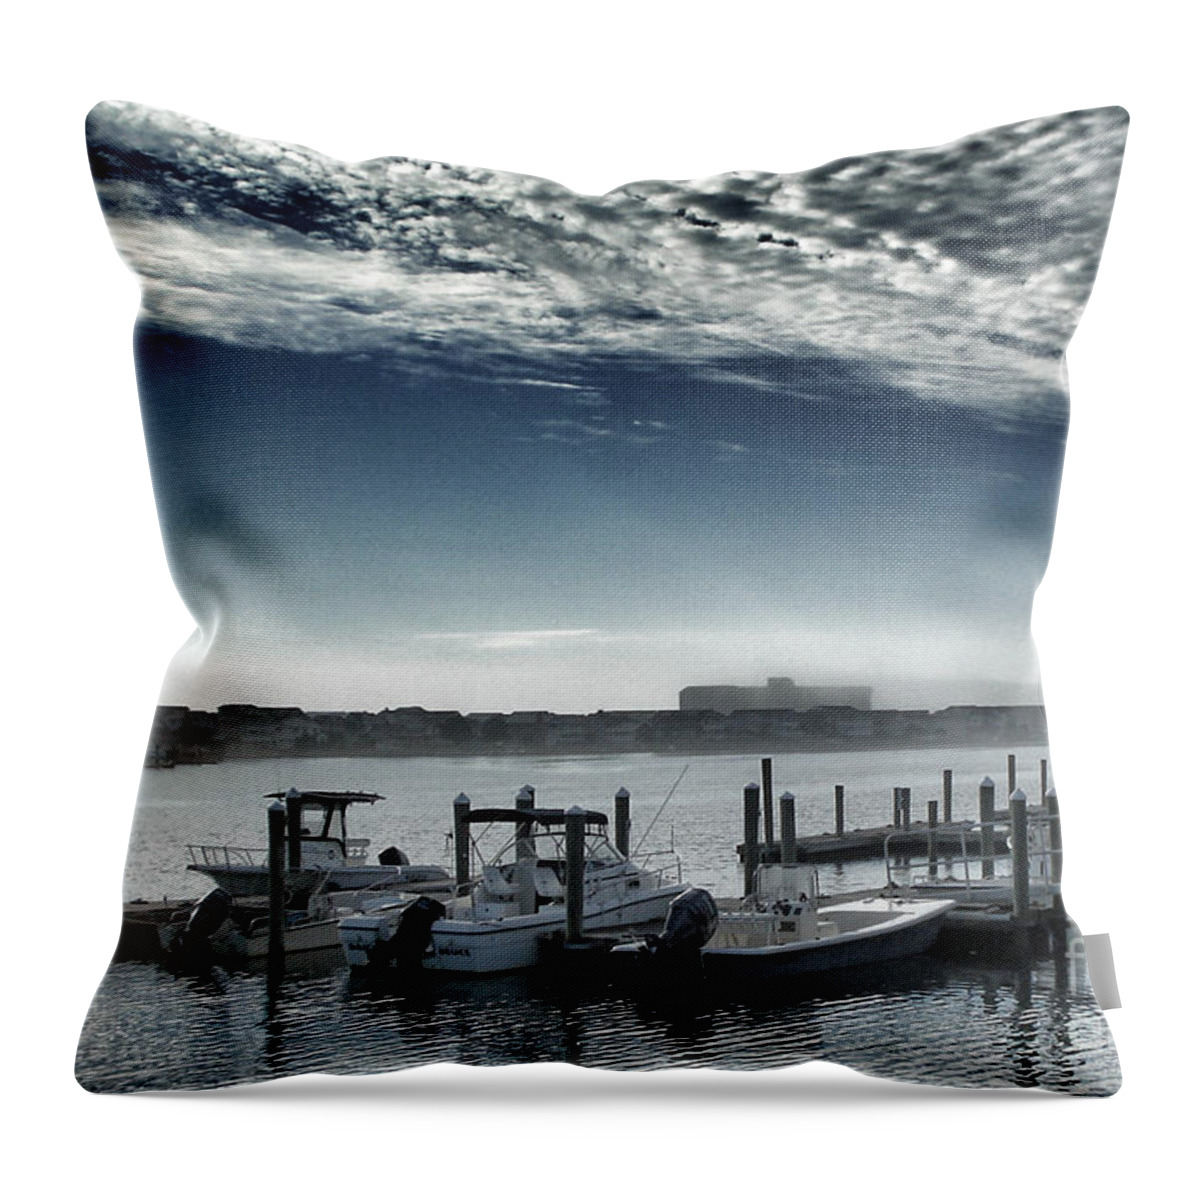 Wrightsville Beach Throw Pillow featuring the photograph View From A Bridge by Phil Mancuso